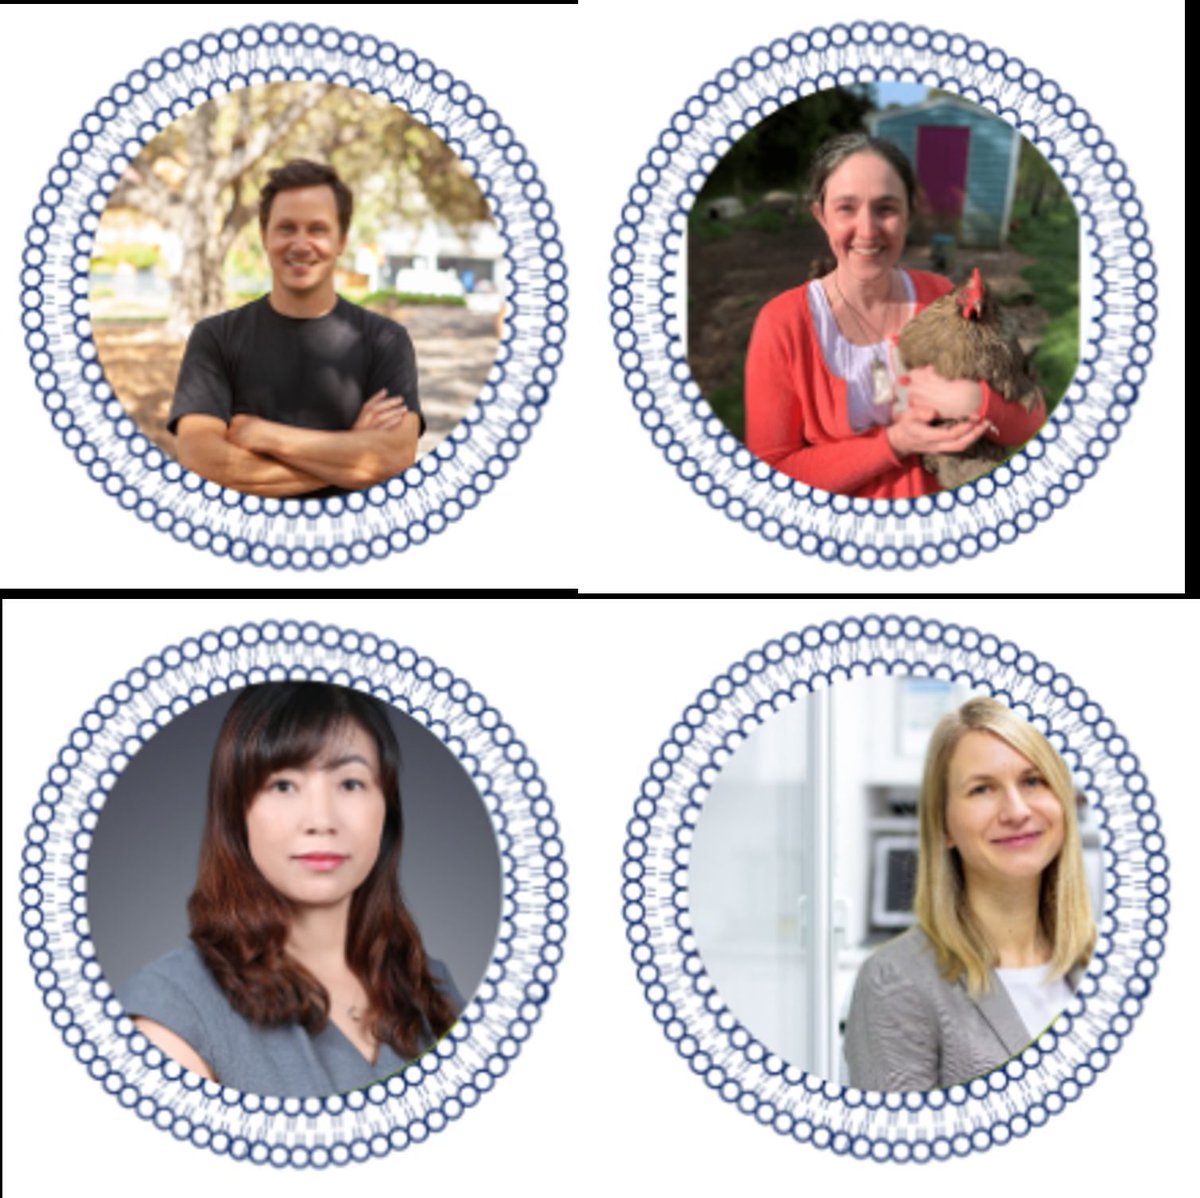 The #ISEV2024 International Organizing Committee is excited to welcome you all down under! 🦘🐊 Meet David Greening (buff.ly/3xVJlqU), Cherie Blenkiron (@cblenkie), Qing-Ling Fu (@QingLingFu29437) and Metka Lenassi (@lenassimetka) buff.ly/3L58fsa